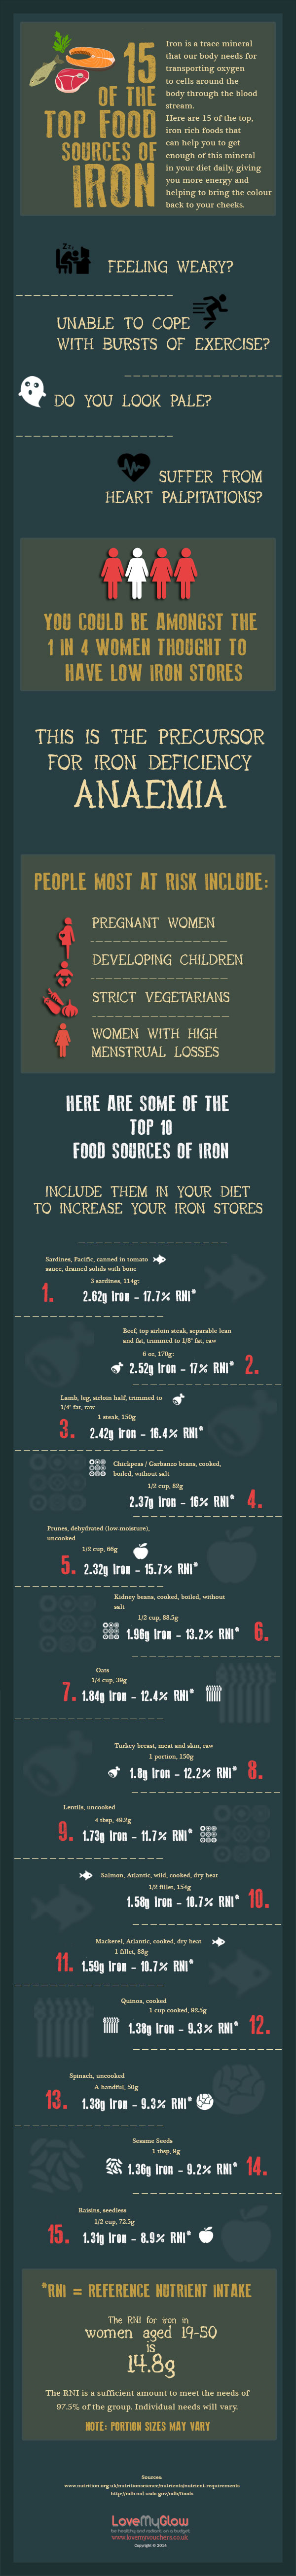 15 Of The Foods Super Rich In Iron Infographic